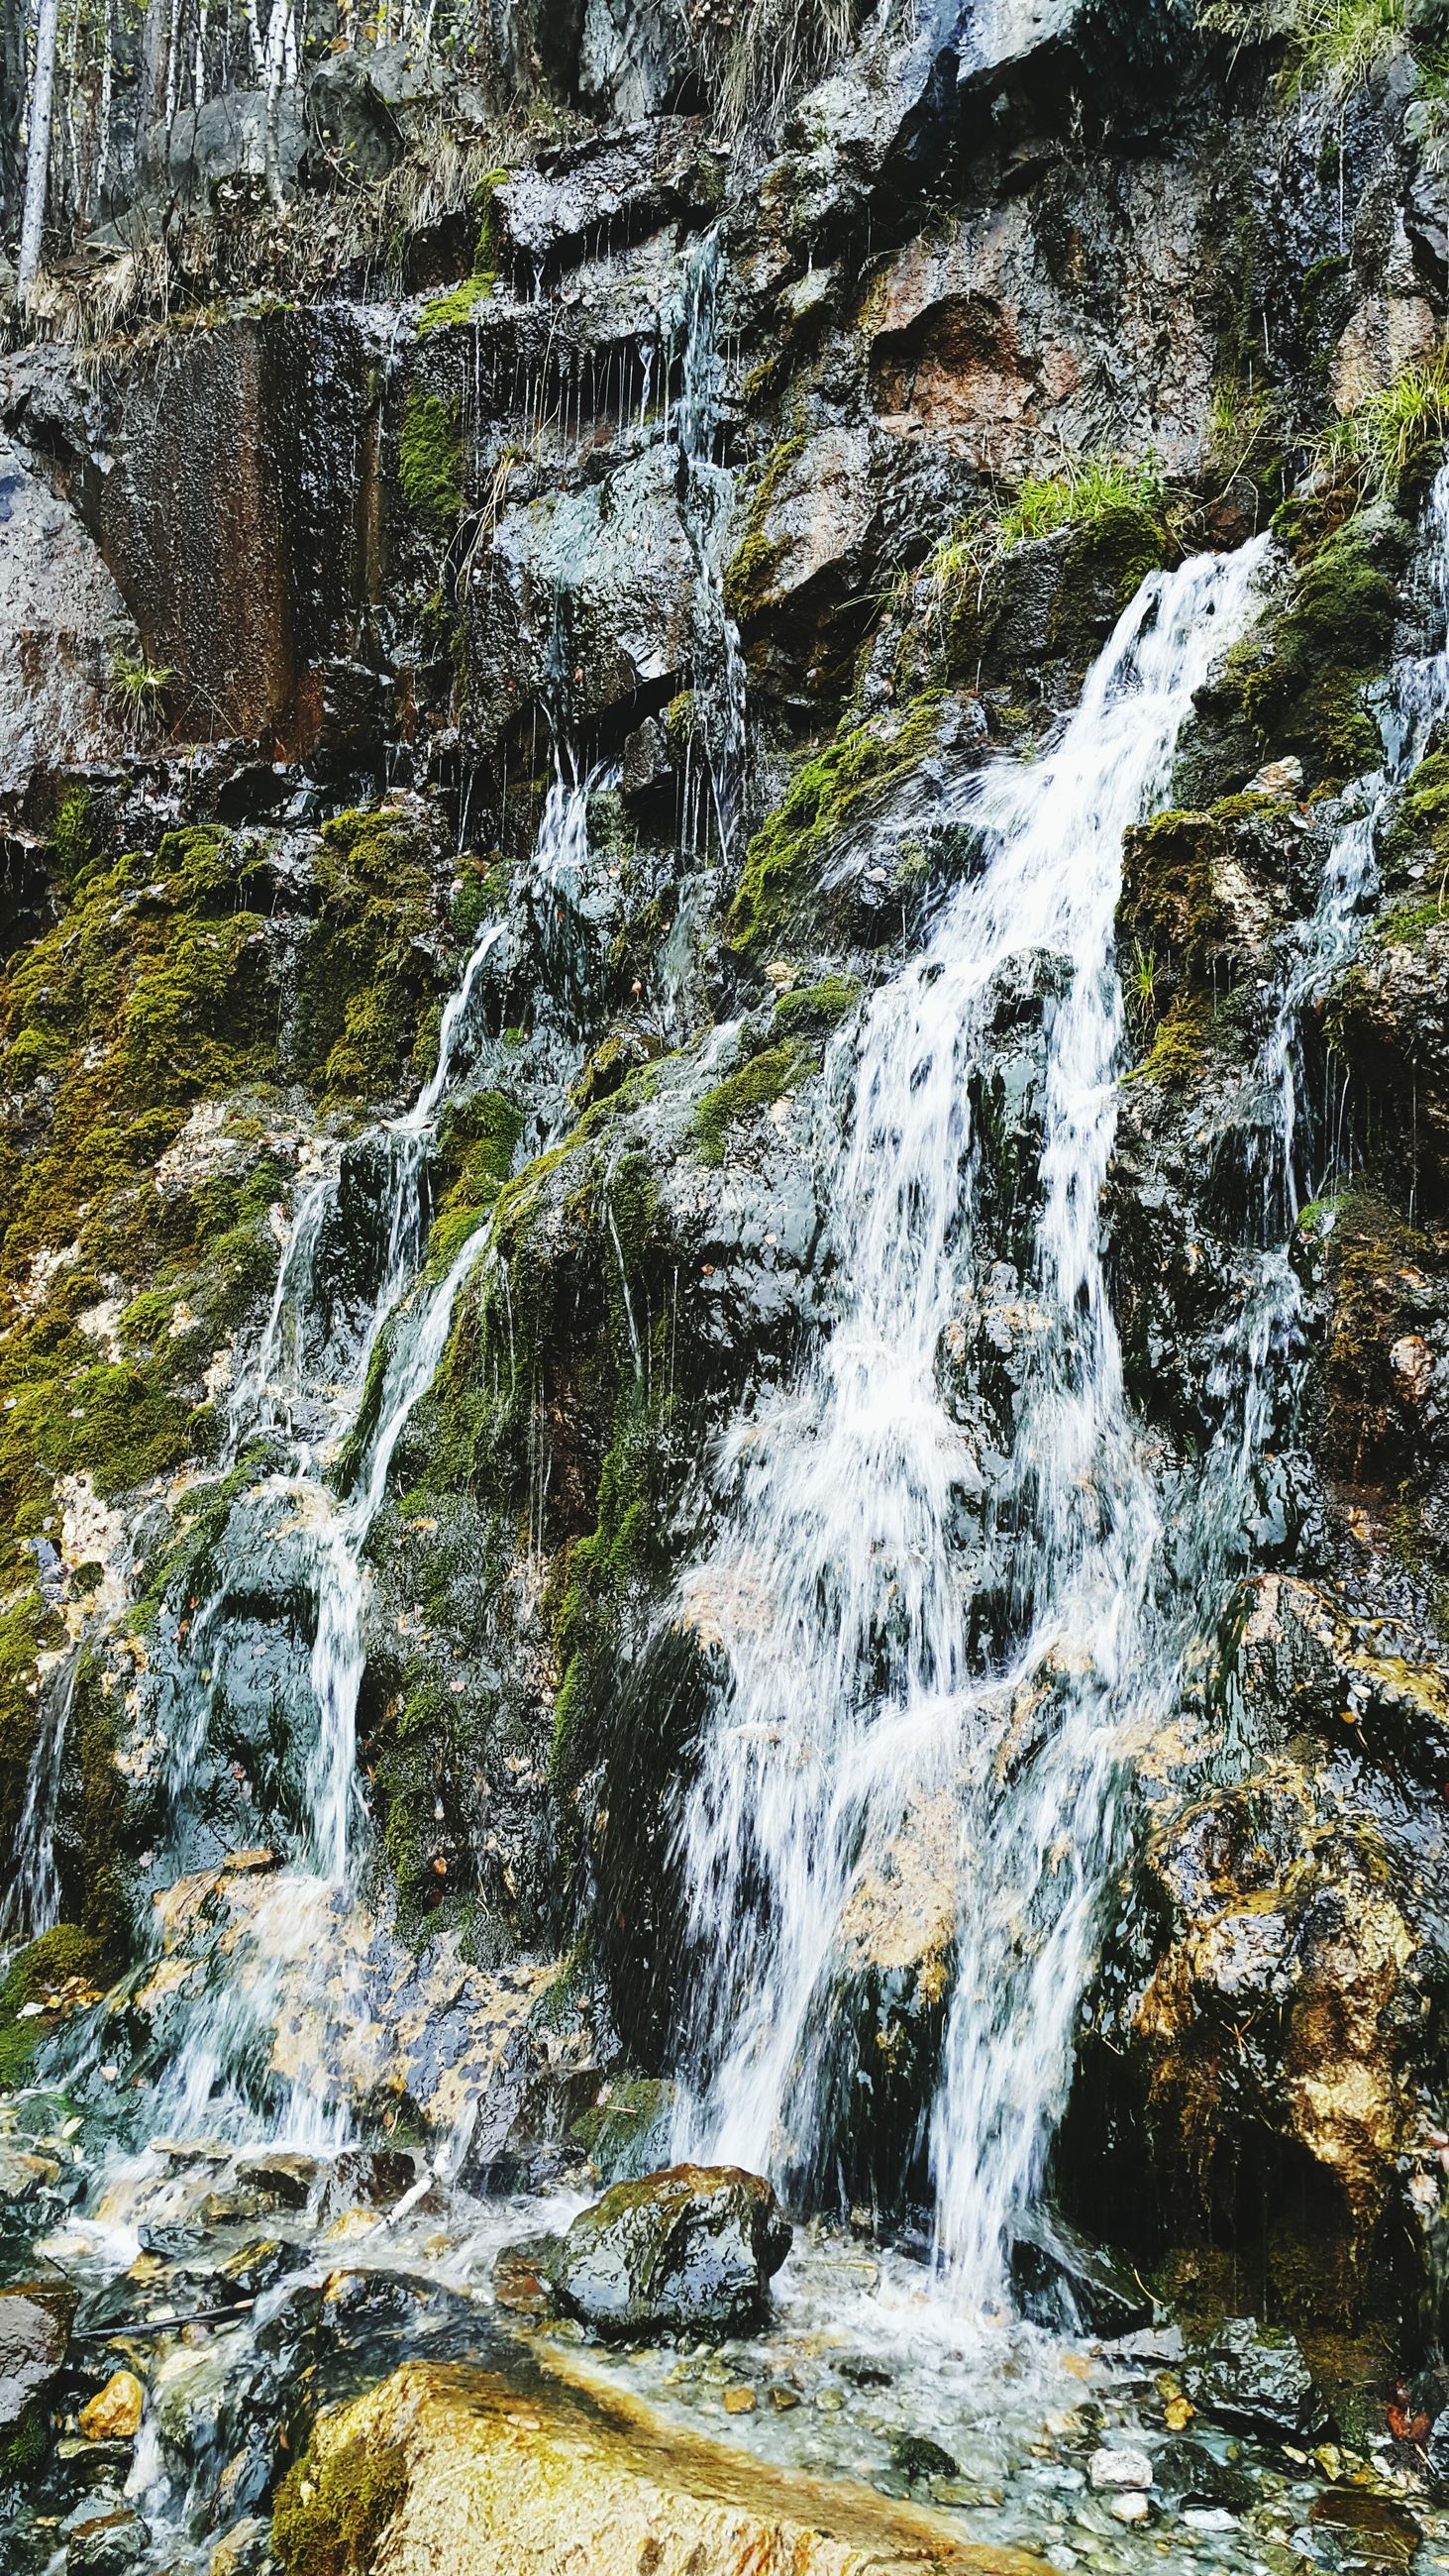 flowing water, waterfall, motion, water, flowing, tree, nature, forest, long exposure, beauty in nature, rock - object, stream, scenics, outdoors, day, growth, no people, blurred motion, river, plant